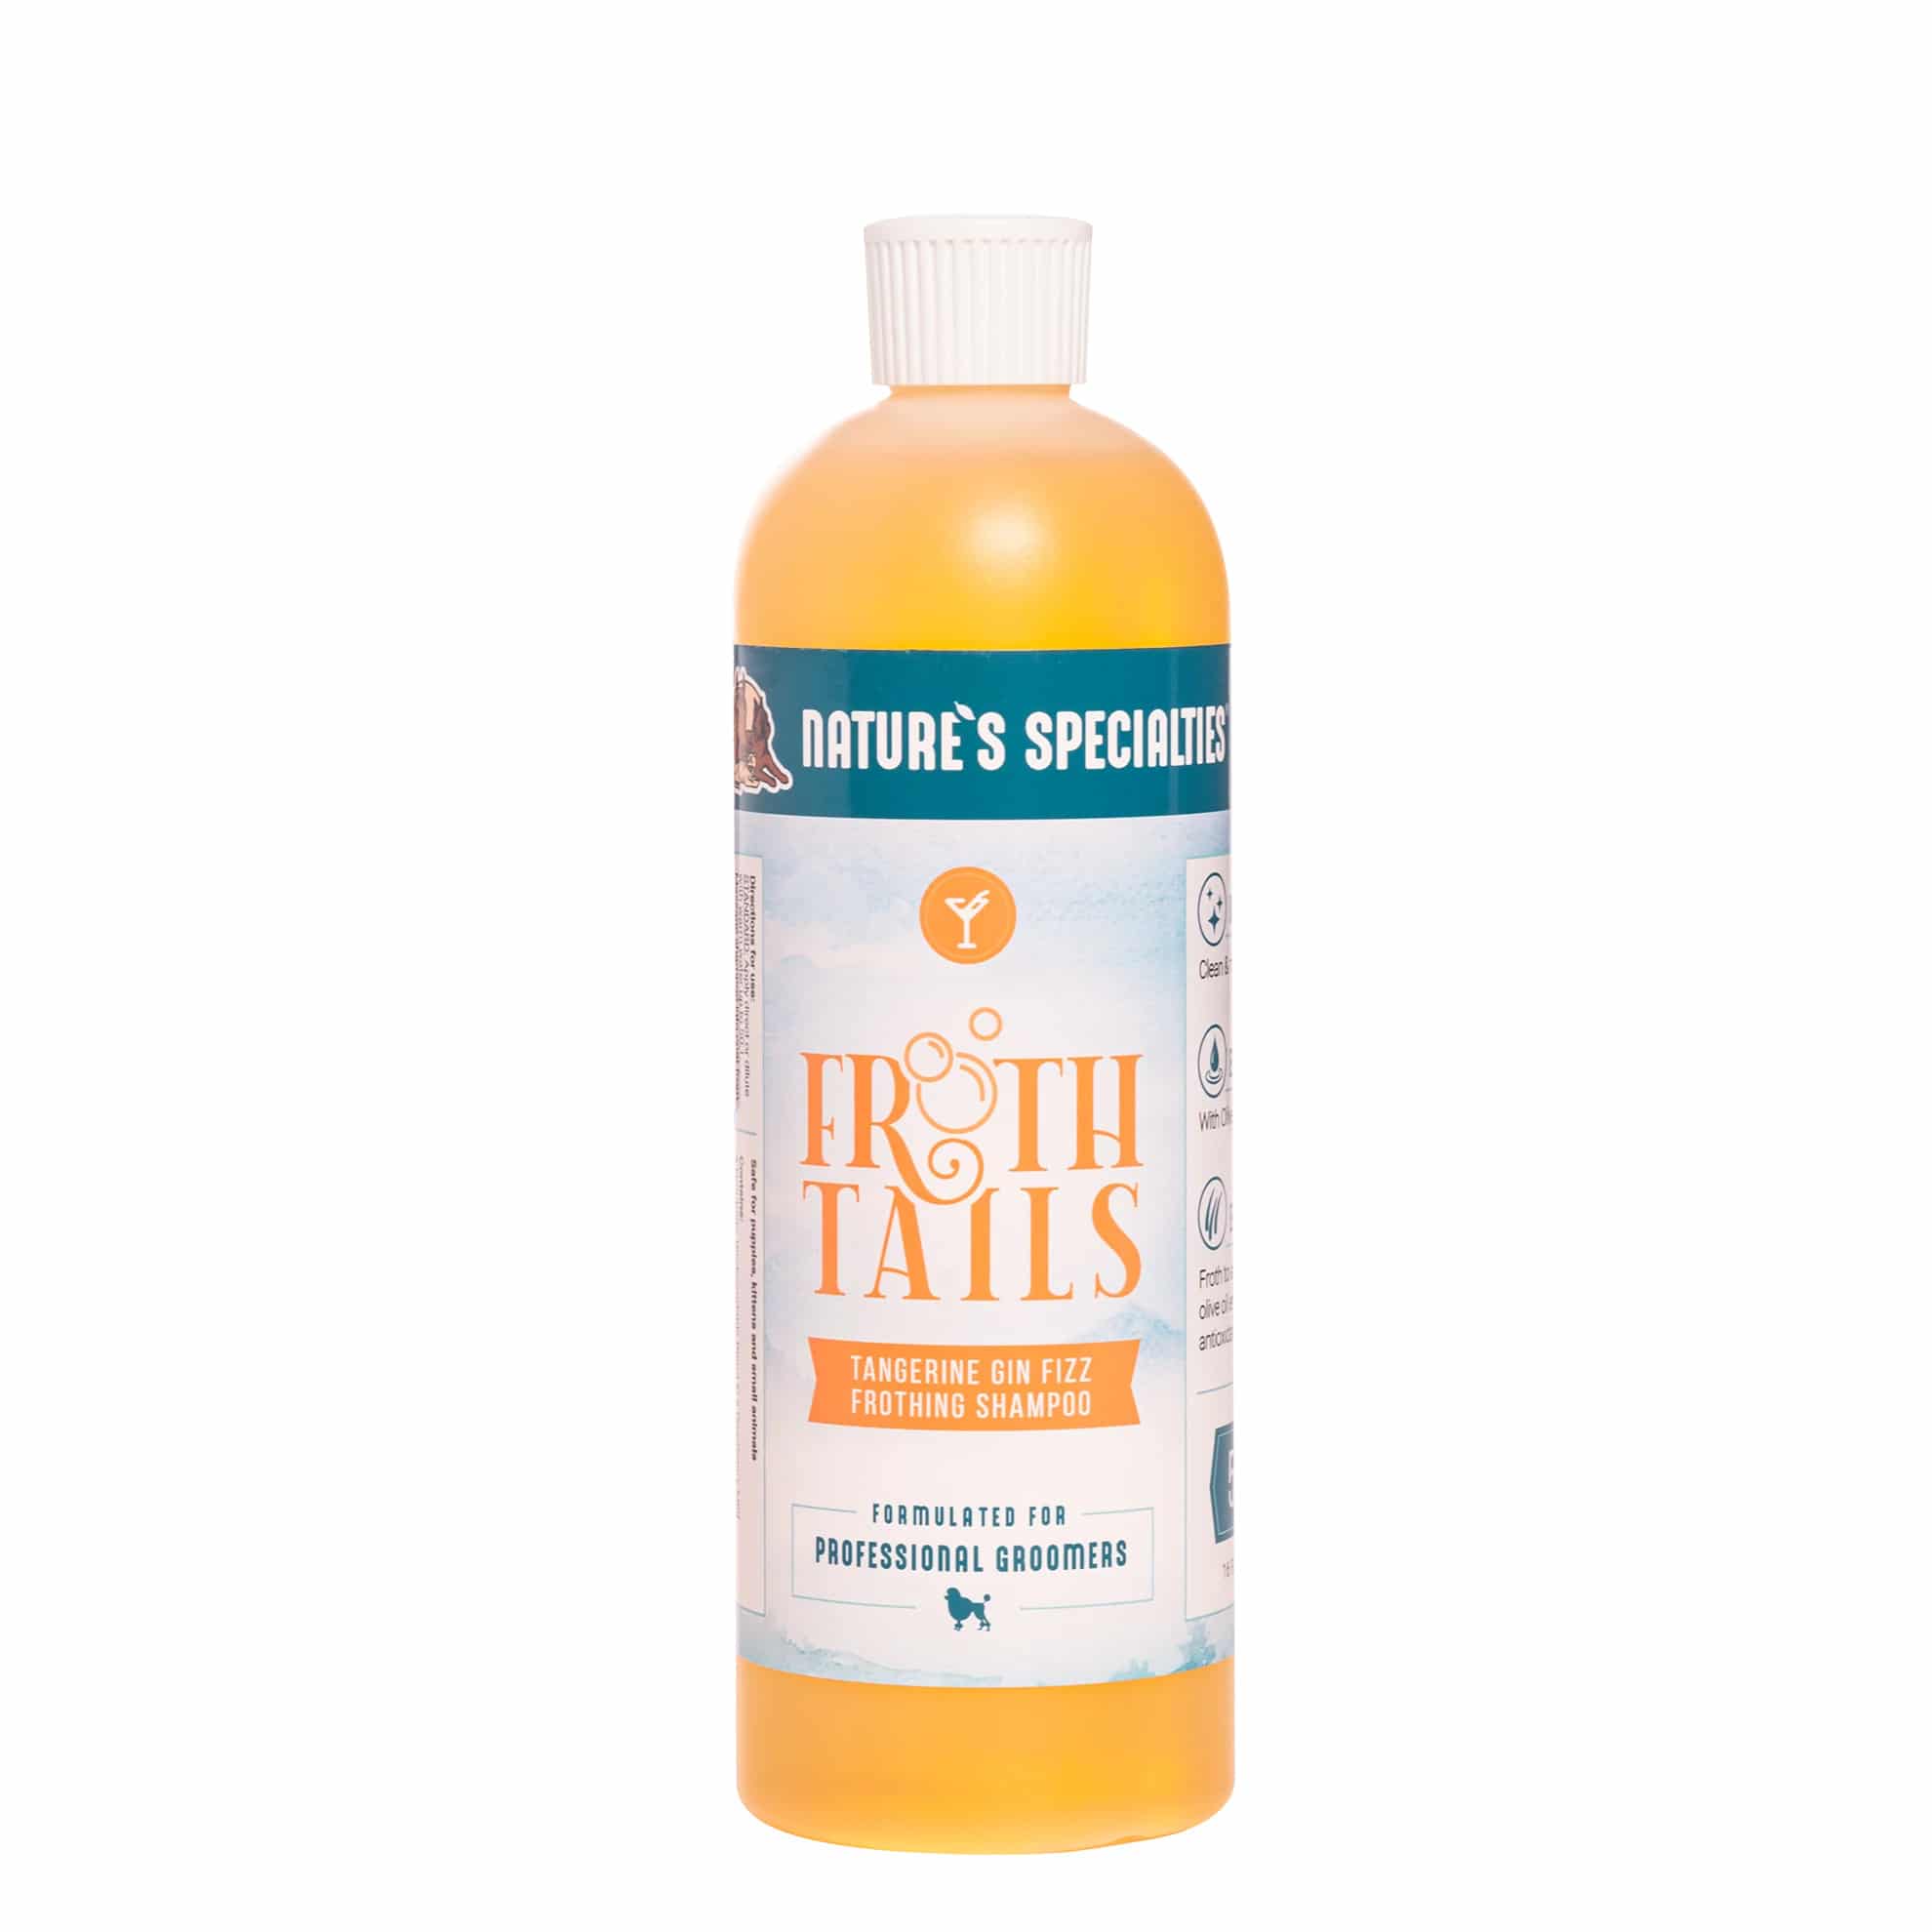 Nature's Specialties Frothtails Tangerine Gin Fizz Shampoo 16oz